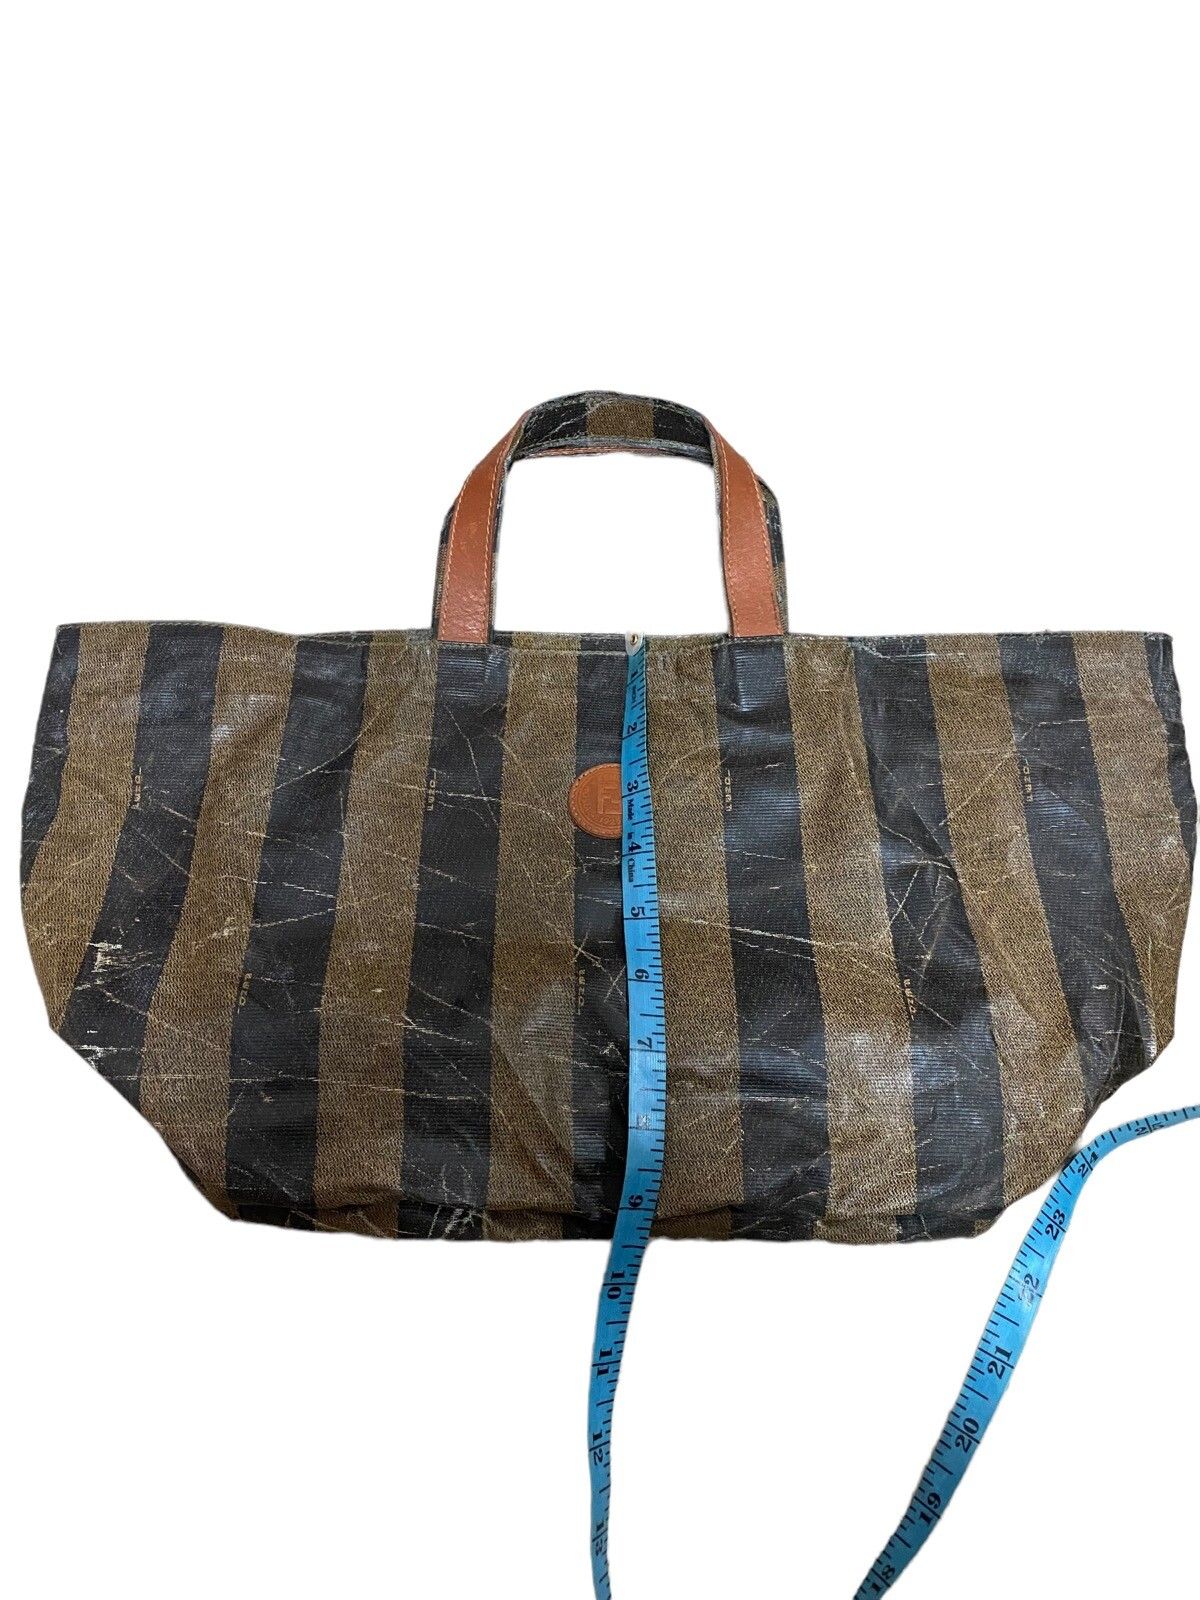 Fendi Roma Pequin Striped Tote Bag Made In Italy - 10